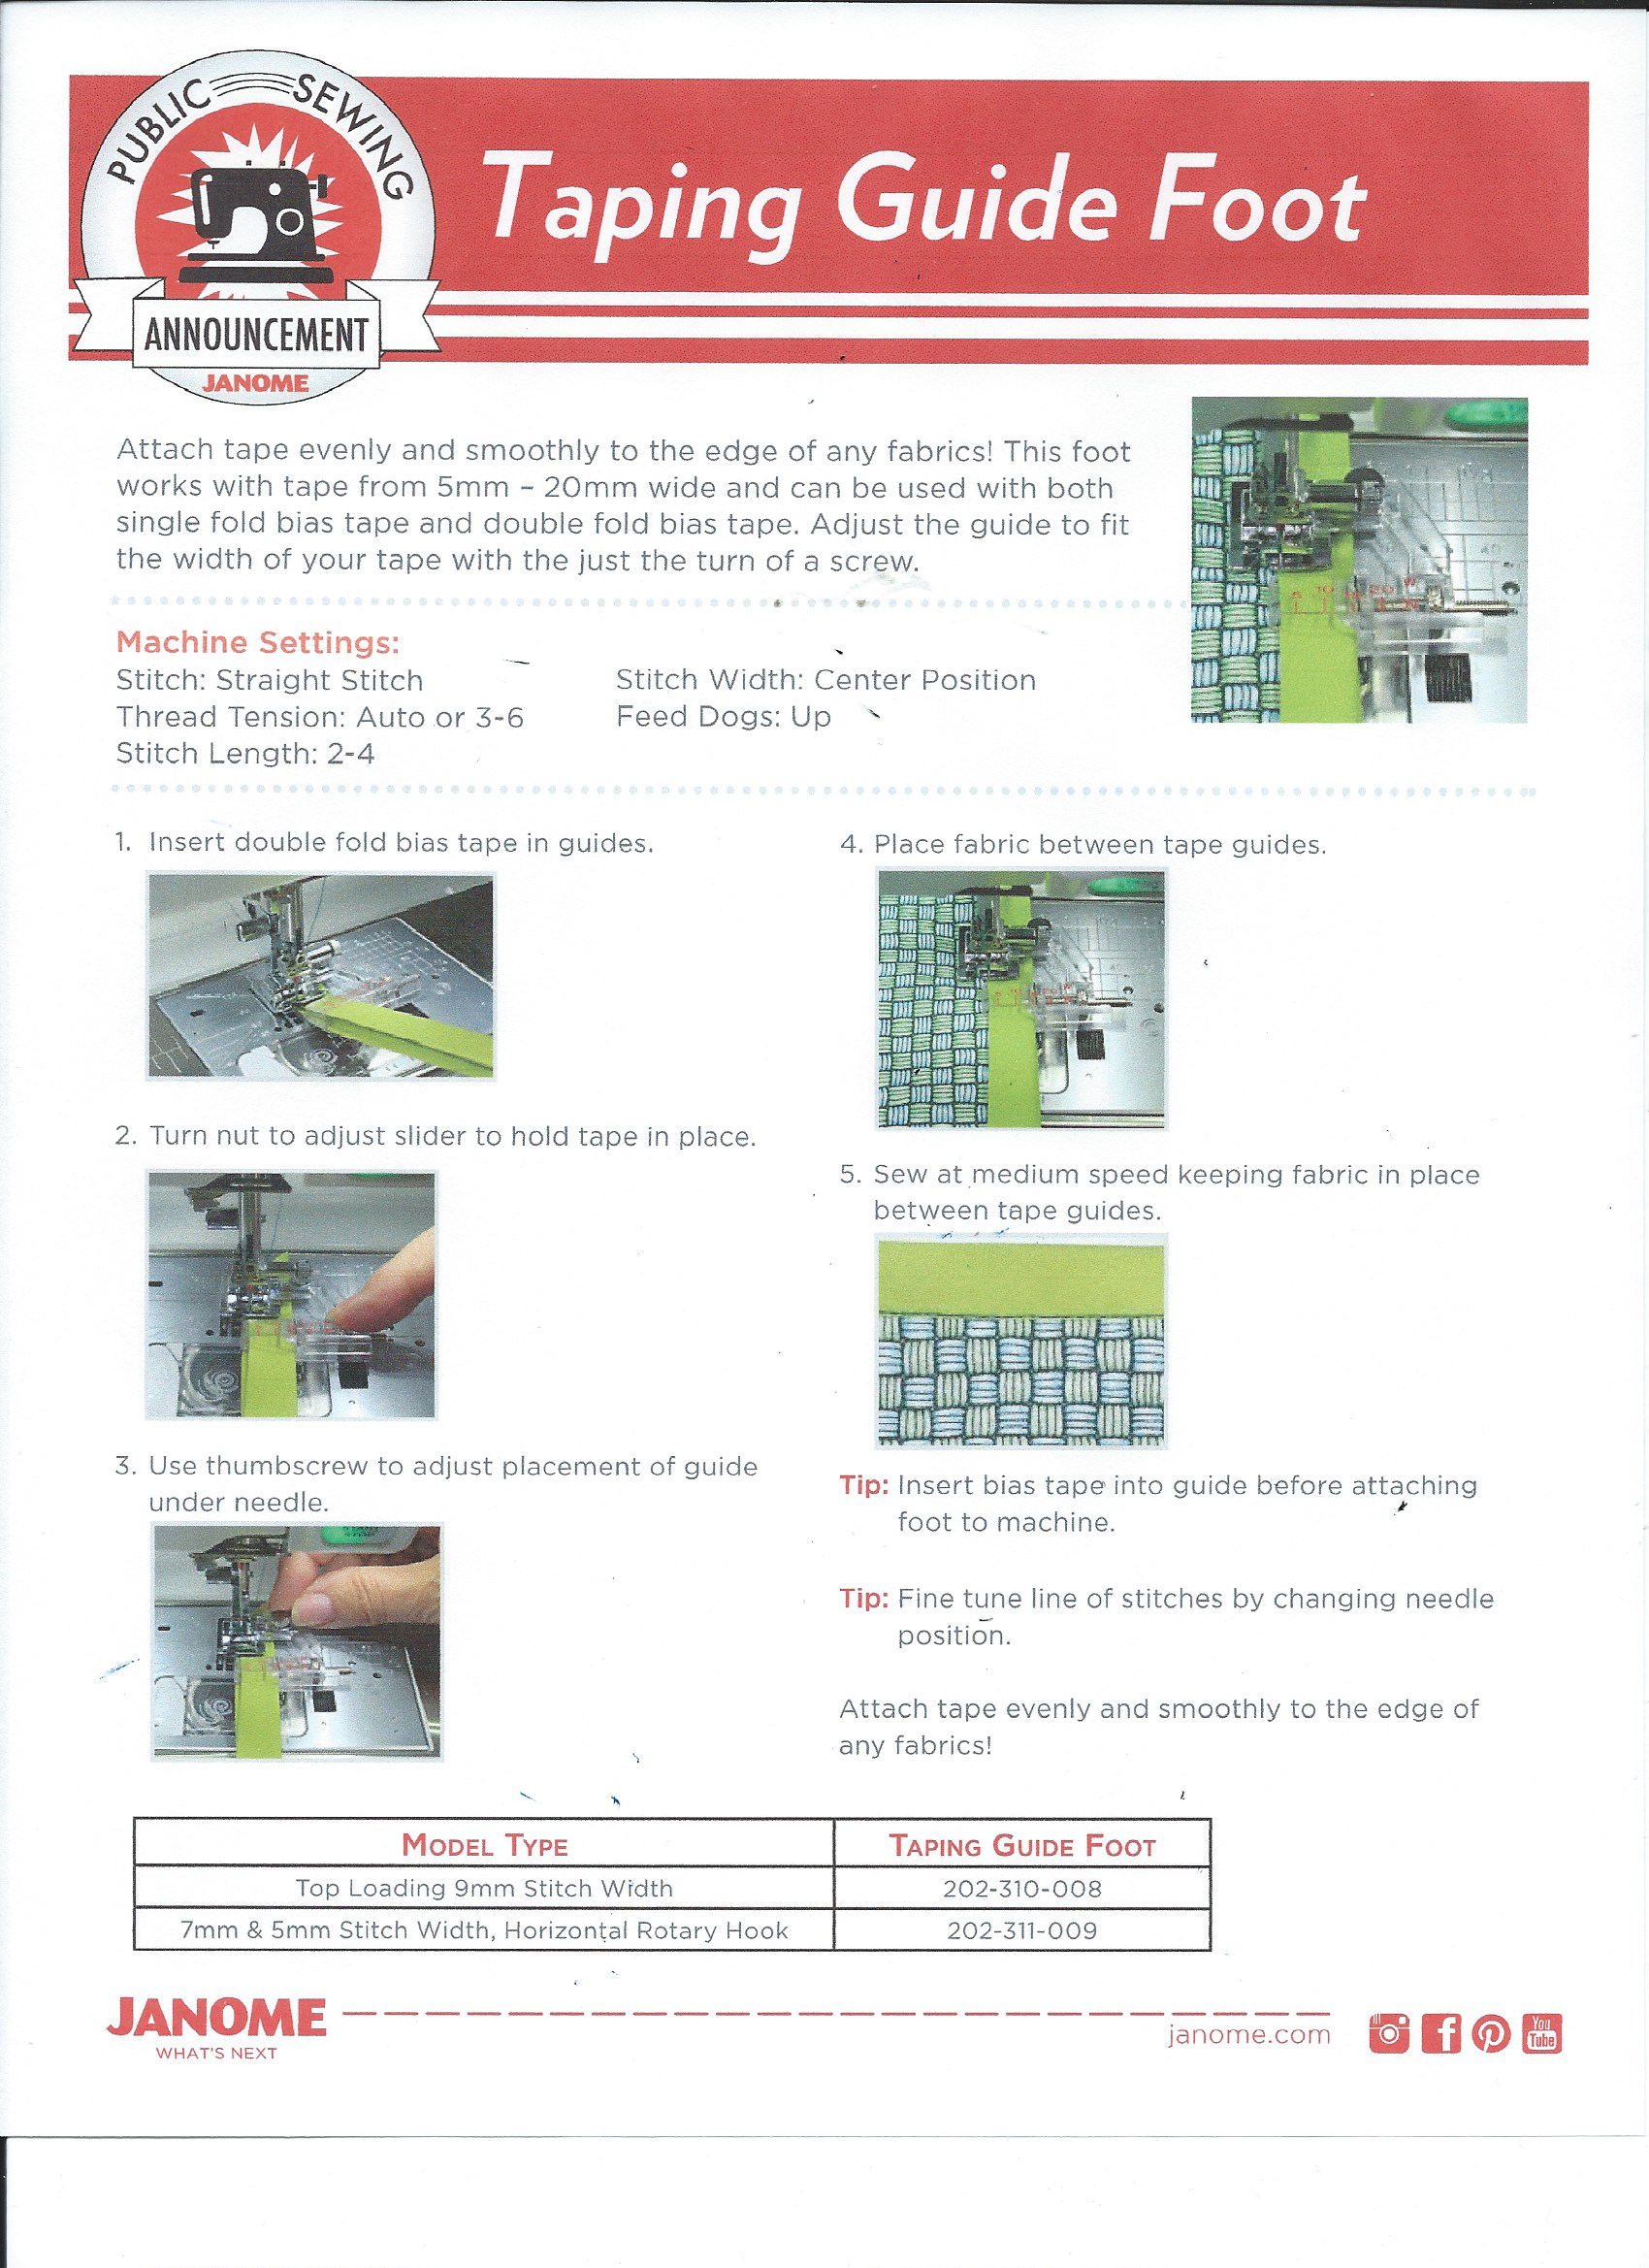 janome-guide-foot-product-sheet.bmp